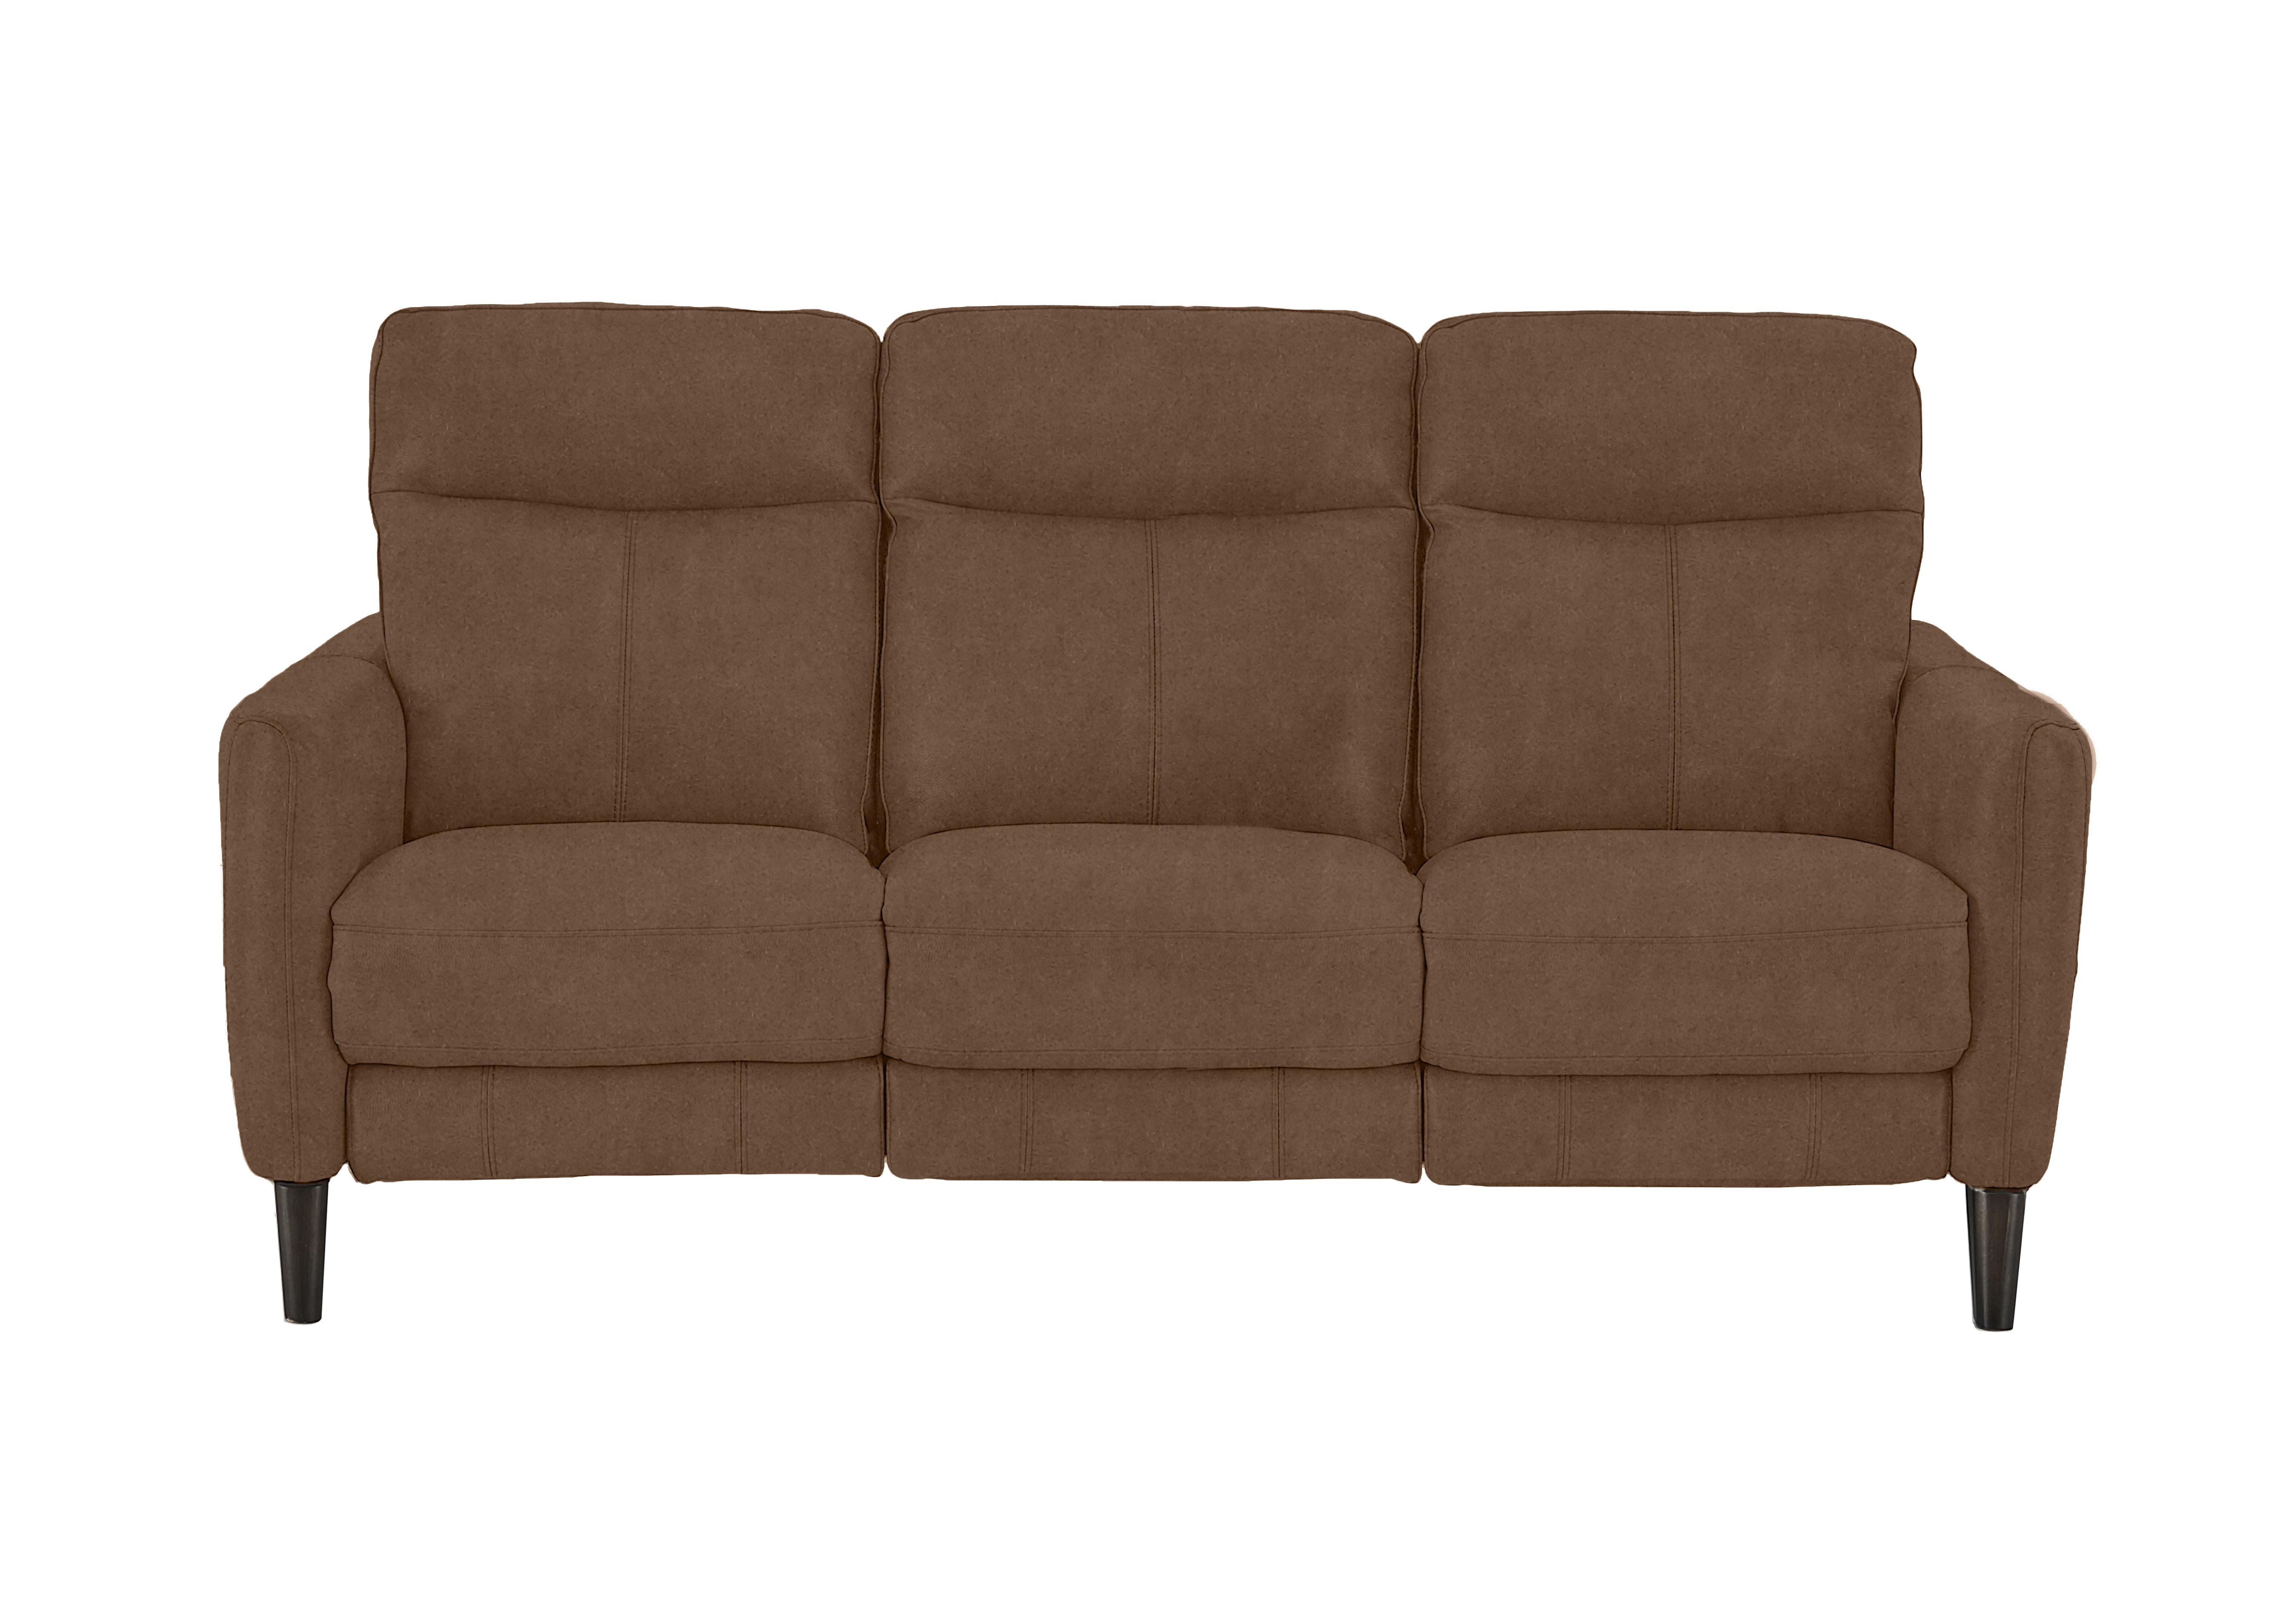 Compact Collection Petit 3 Seater Fabric Sofa in Bfa-Blj-R05 Hazelnut on Furniture Village